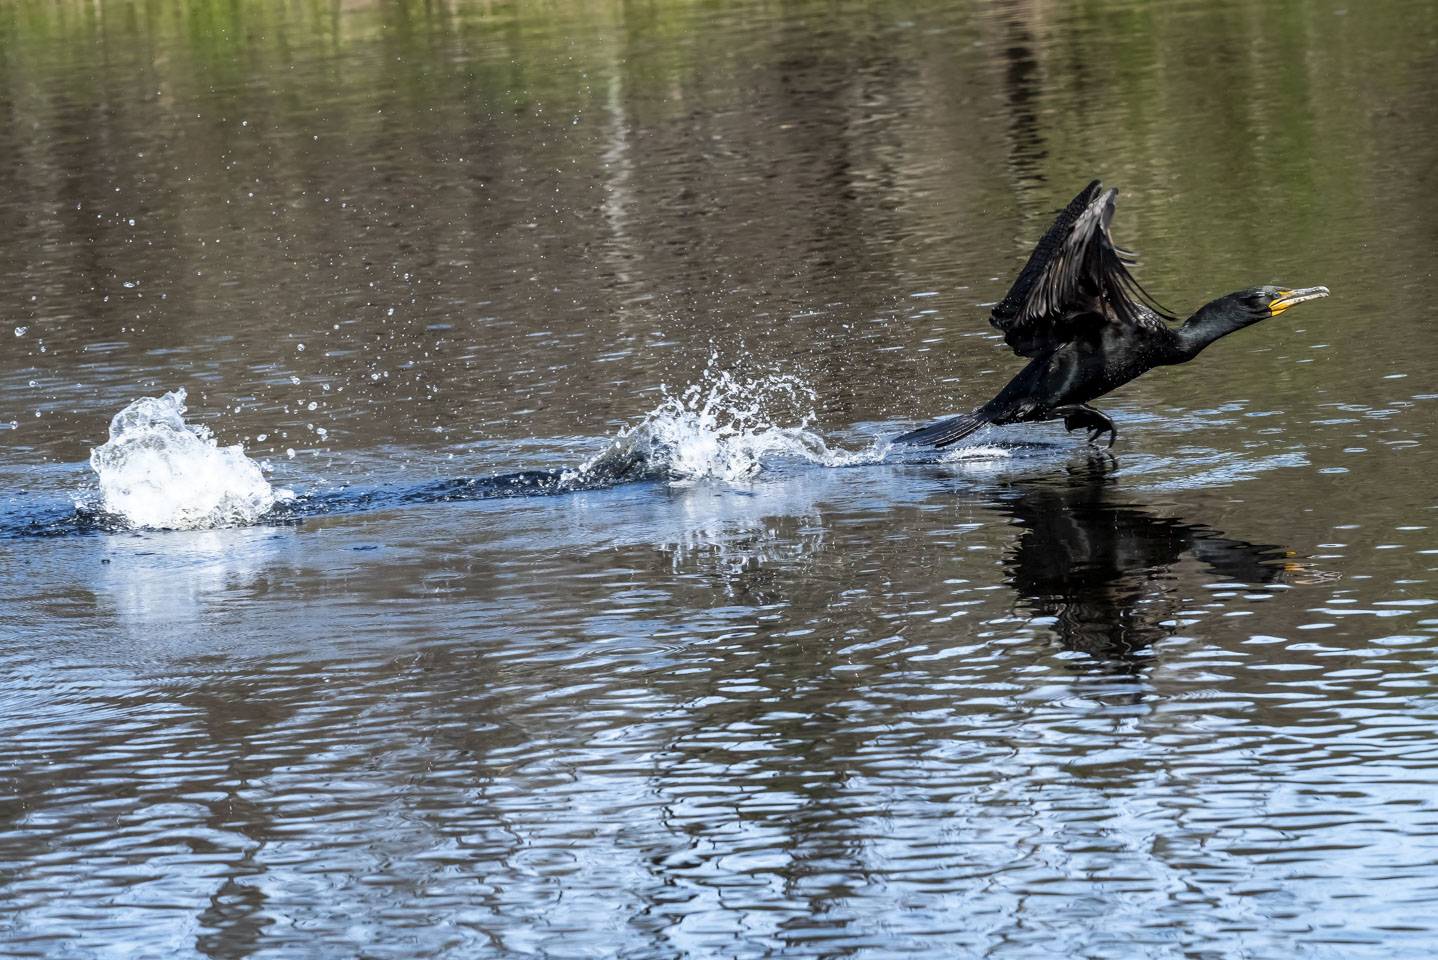 A cormorant in the process of taking off from water